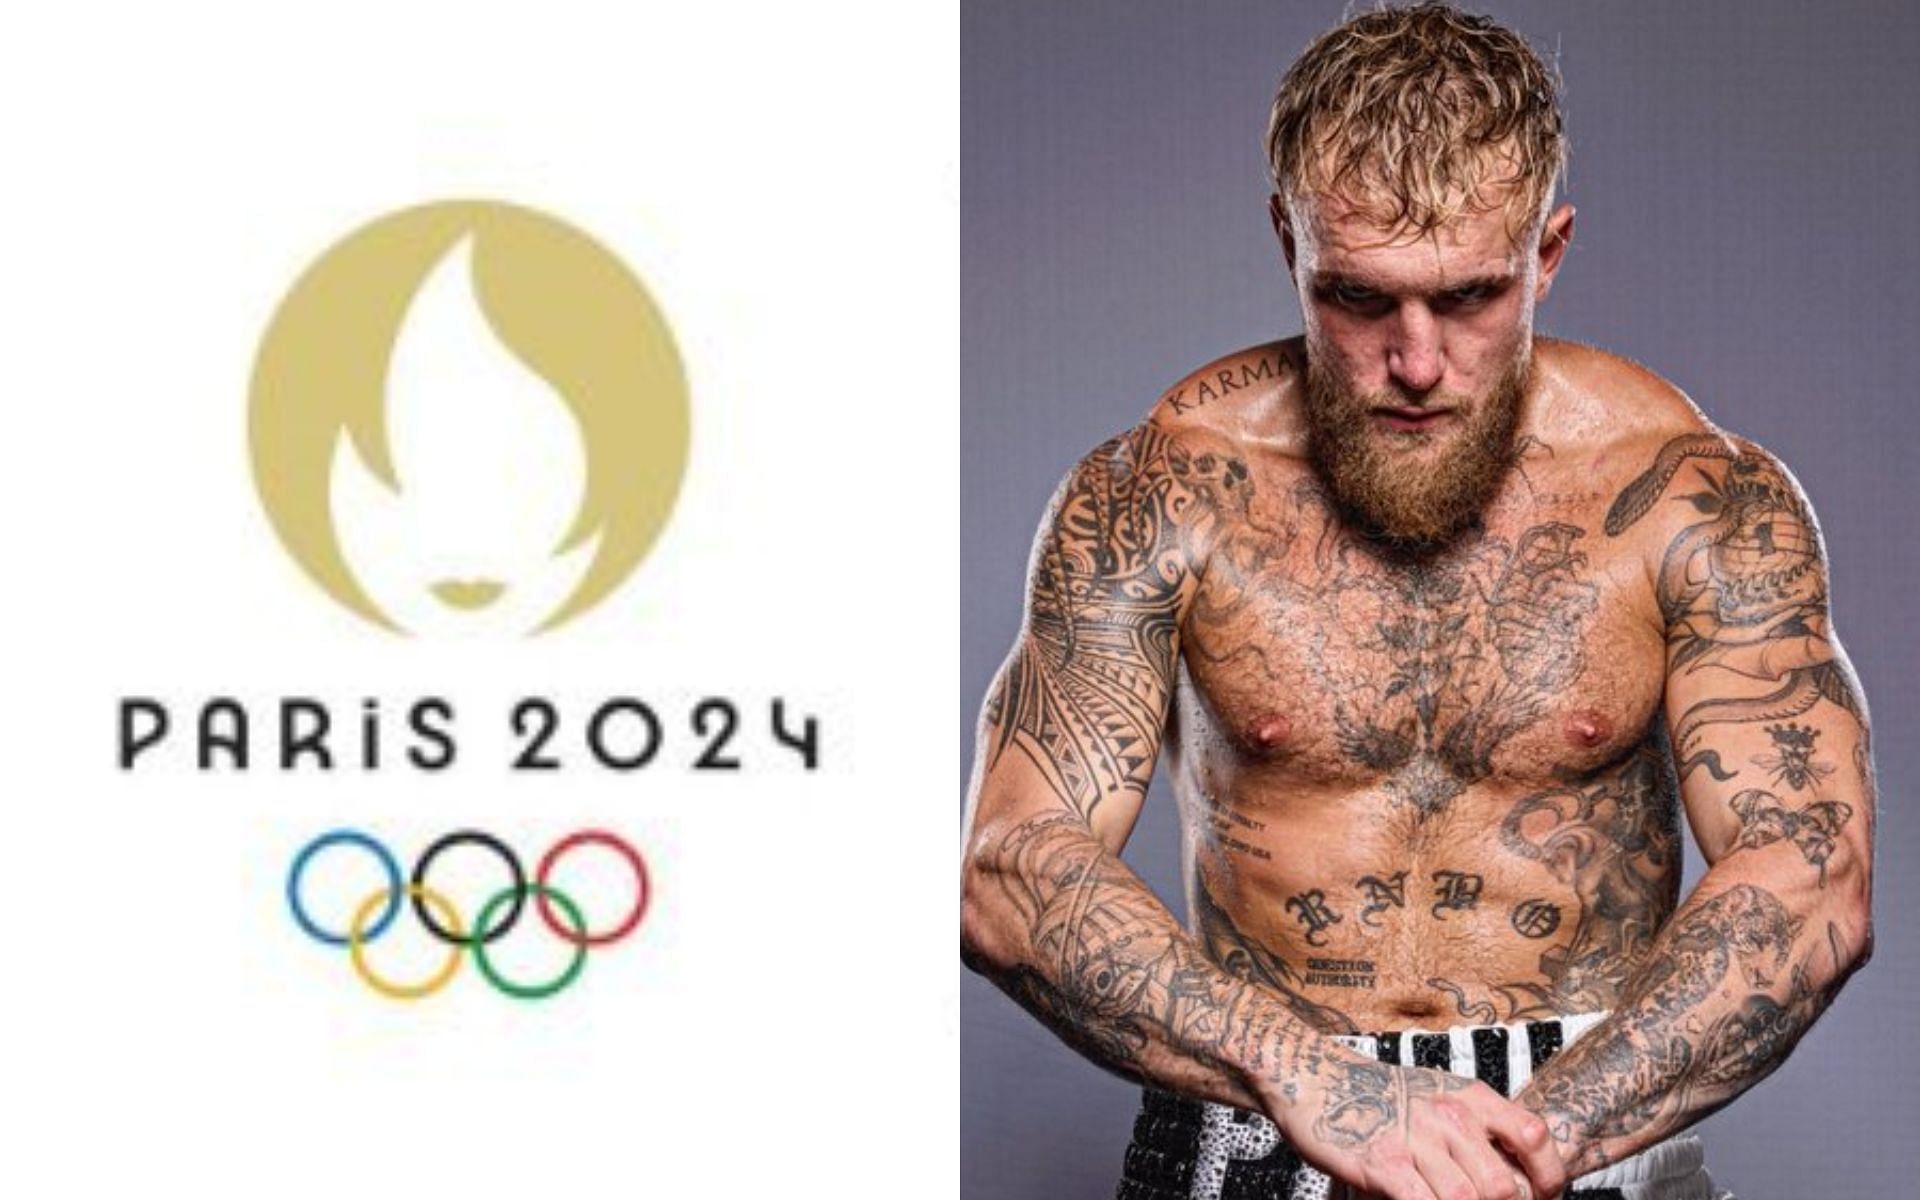 Jake Paul [Right] will be partnering with USA Boxing for the 2024 Paris Olympics [Left] [Image courtesy: @Paris2024 and @jakepaul - X]